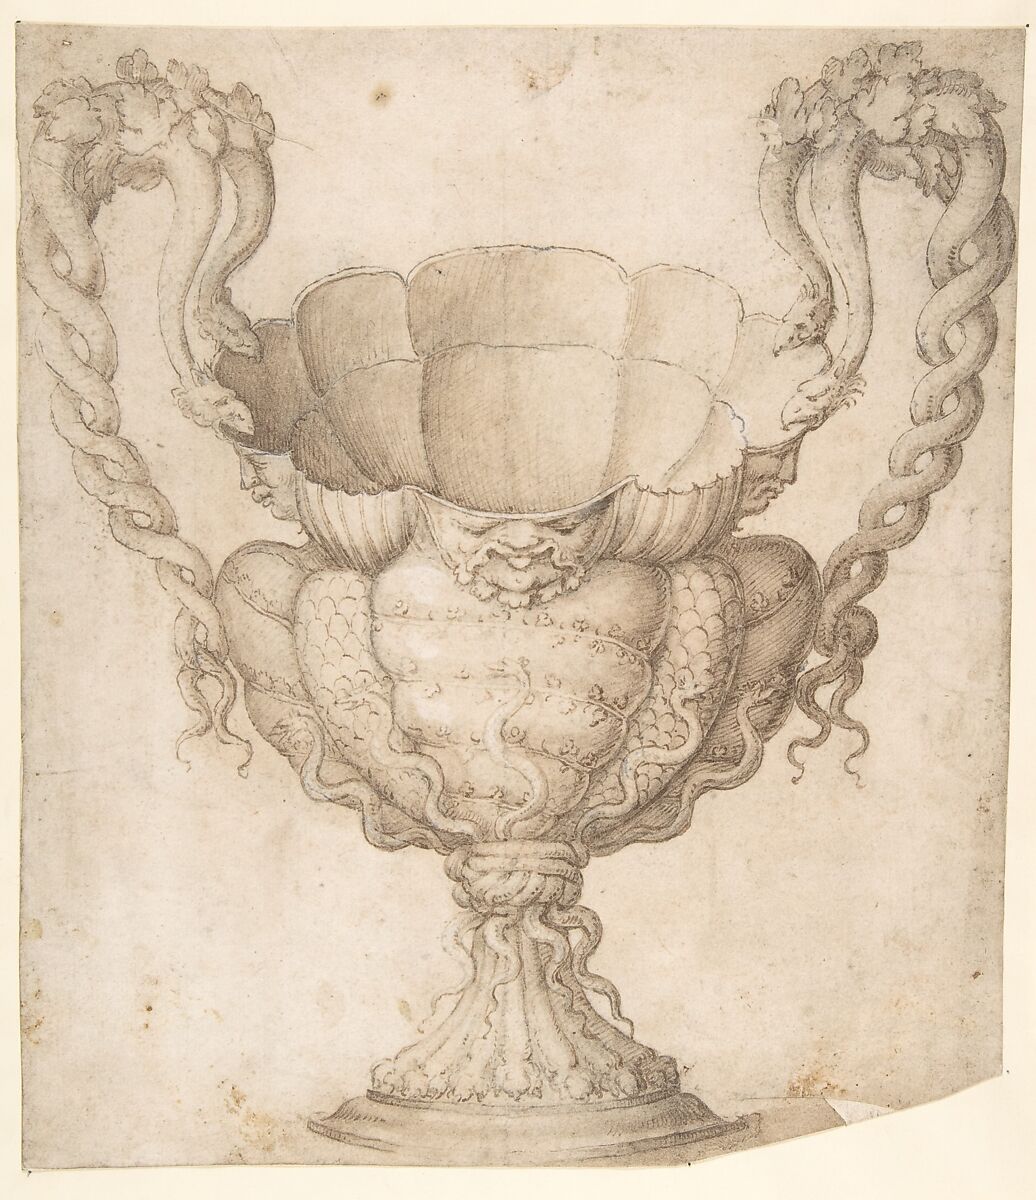 Design for a Decorated Drinking Cup with Floriated Heads around Large Mouth, Intertwined Serpents as Handles, Giulio Romano (Italian, Rome 1499?–1546 Mantua), Pen and brown ink, brush and brown wash over traces of black chalk; small corrections in white gouache 